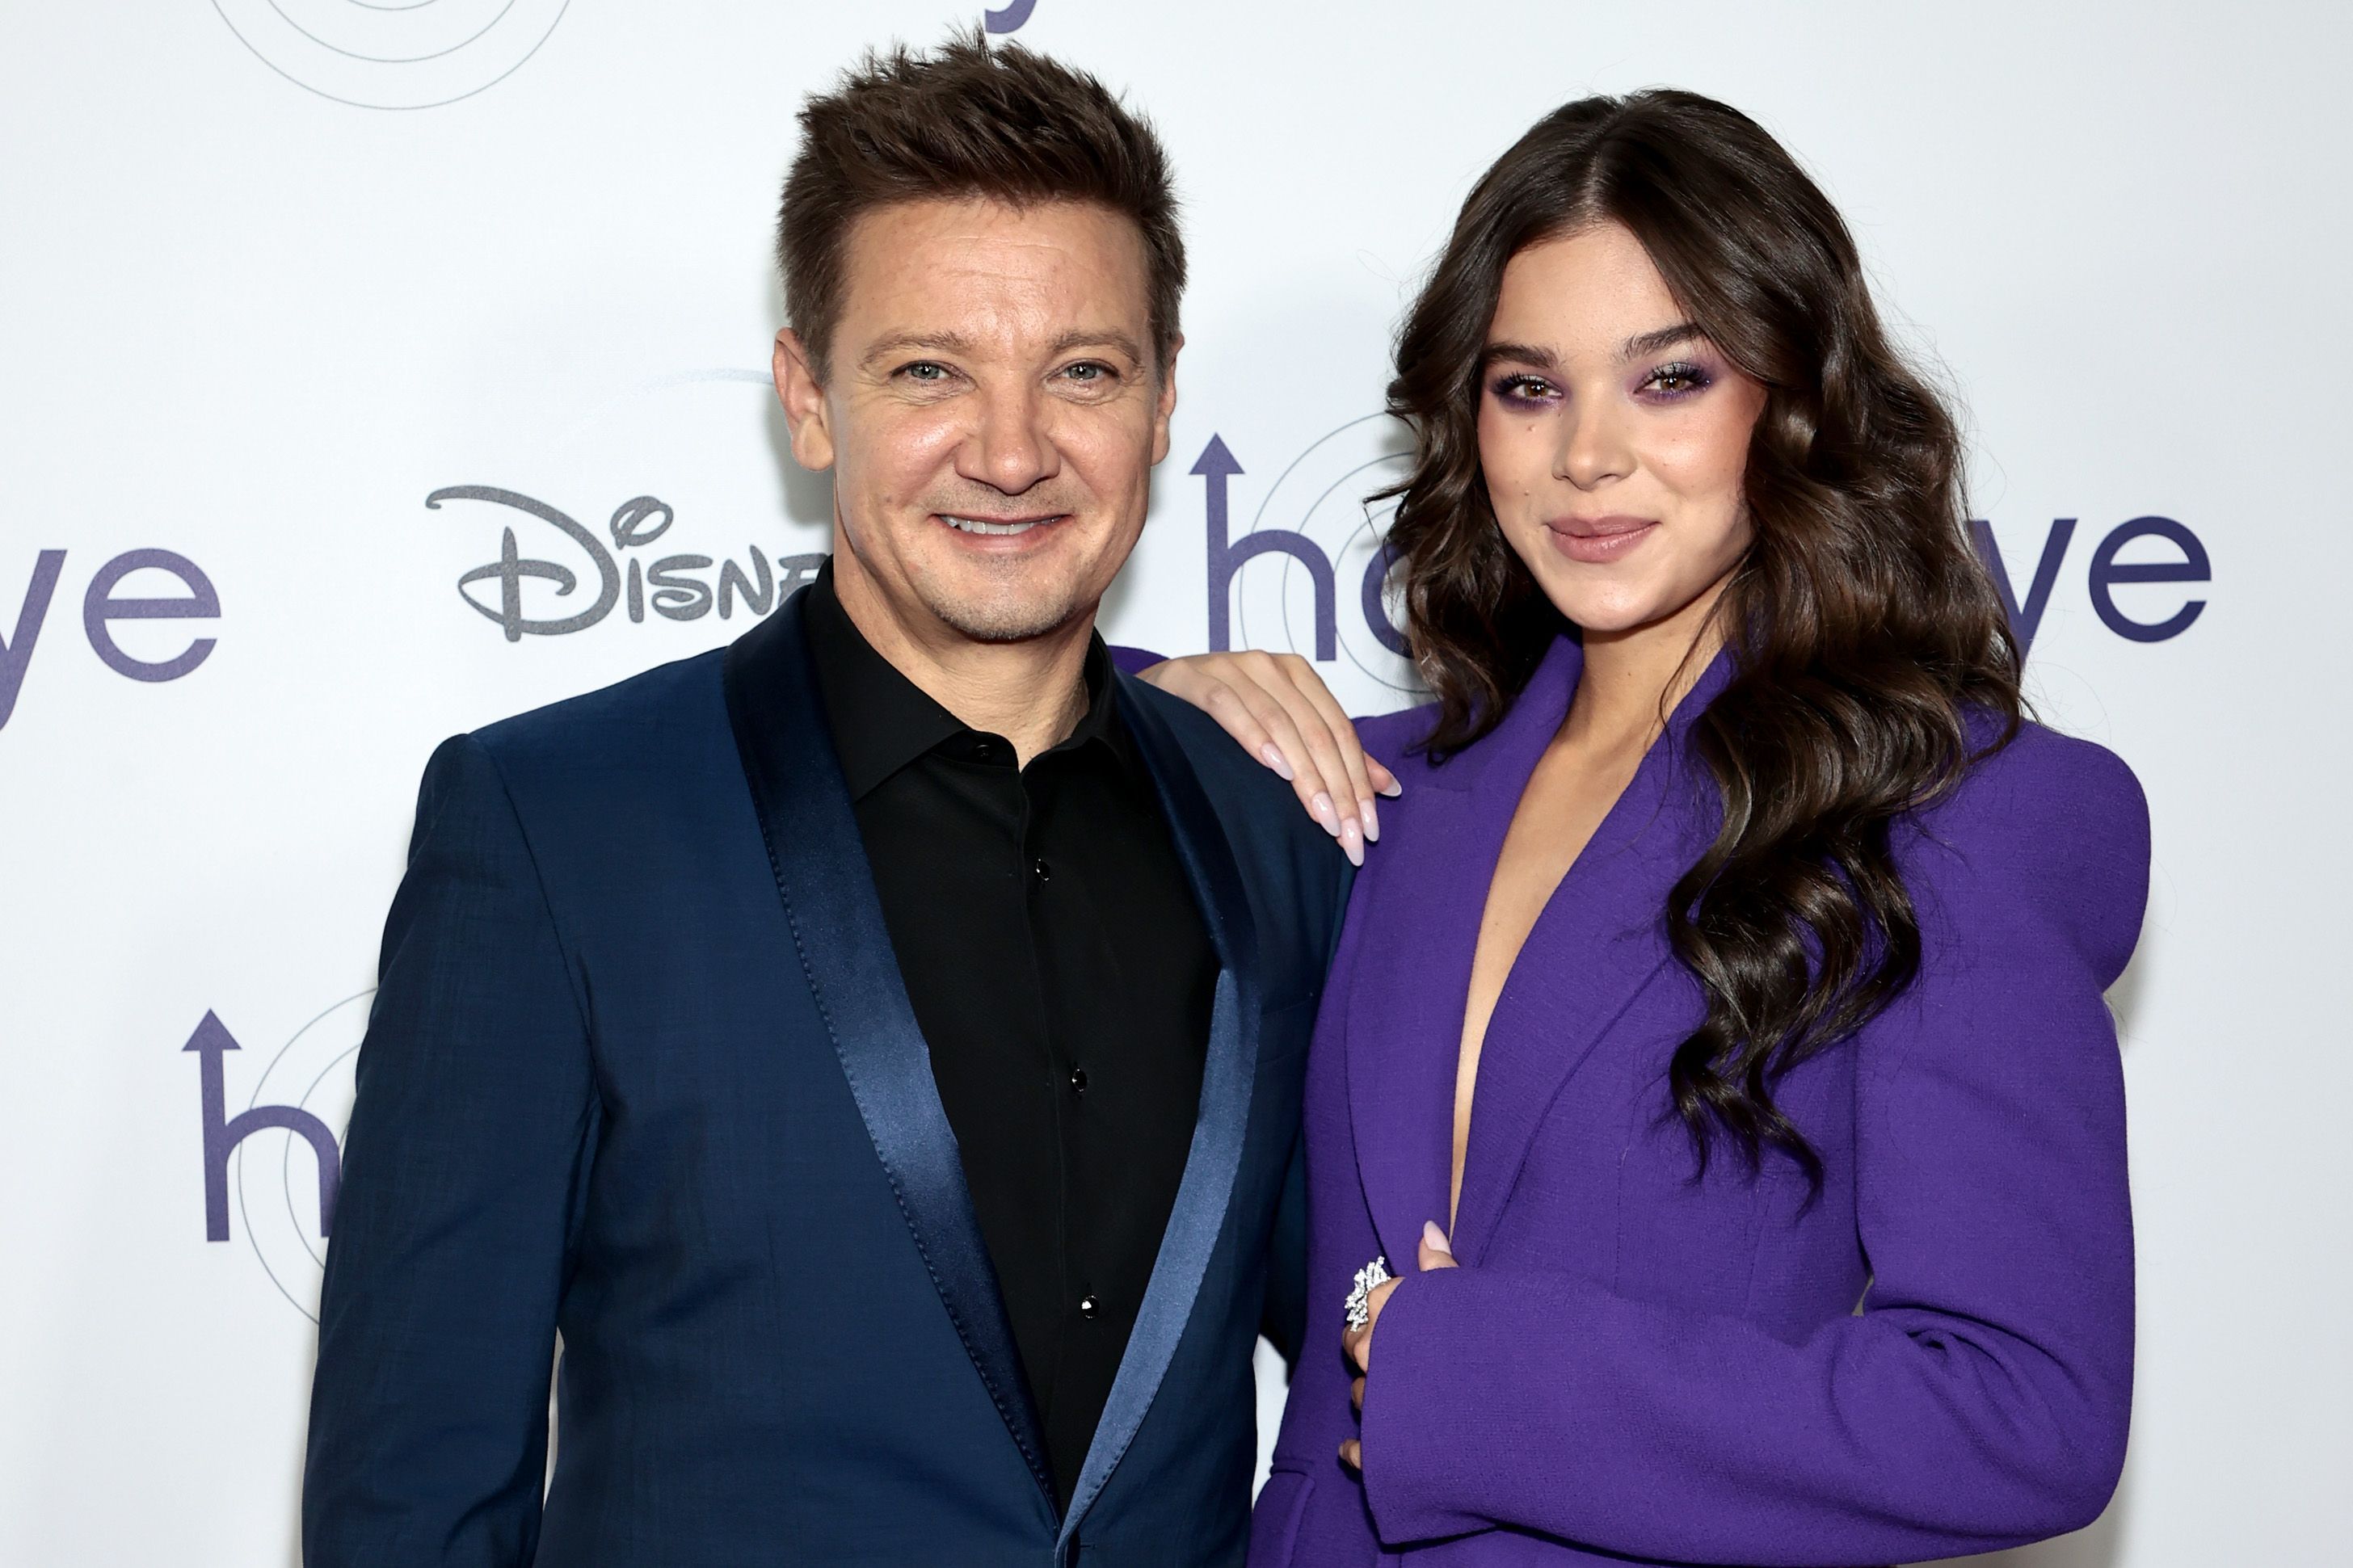 'Hawkeye' stars Jeremy Renner and Hailee Steinfeld pose for a picture together. Renner wears a dark blue suit over a black button-up shirt. Steinfeld wears a purple suit.